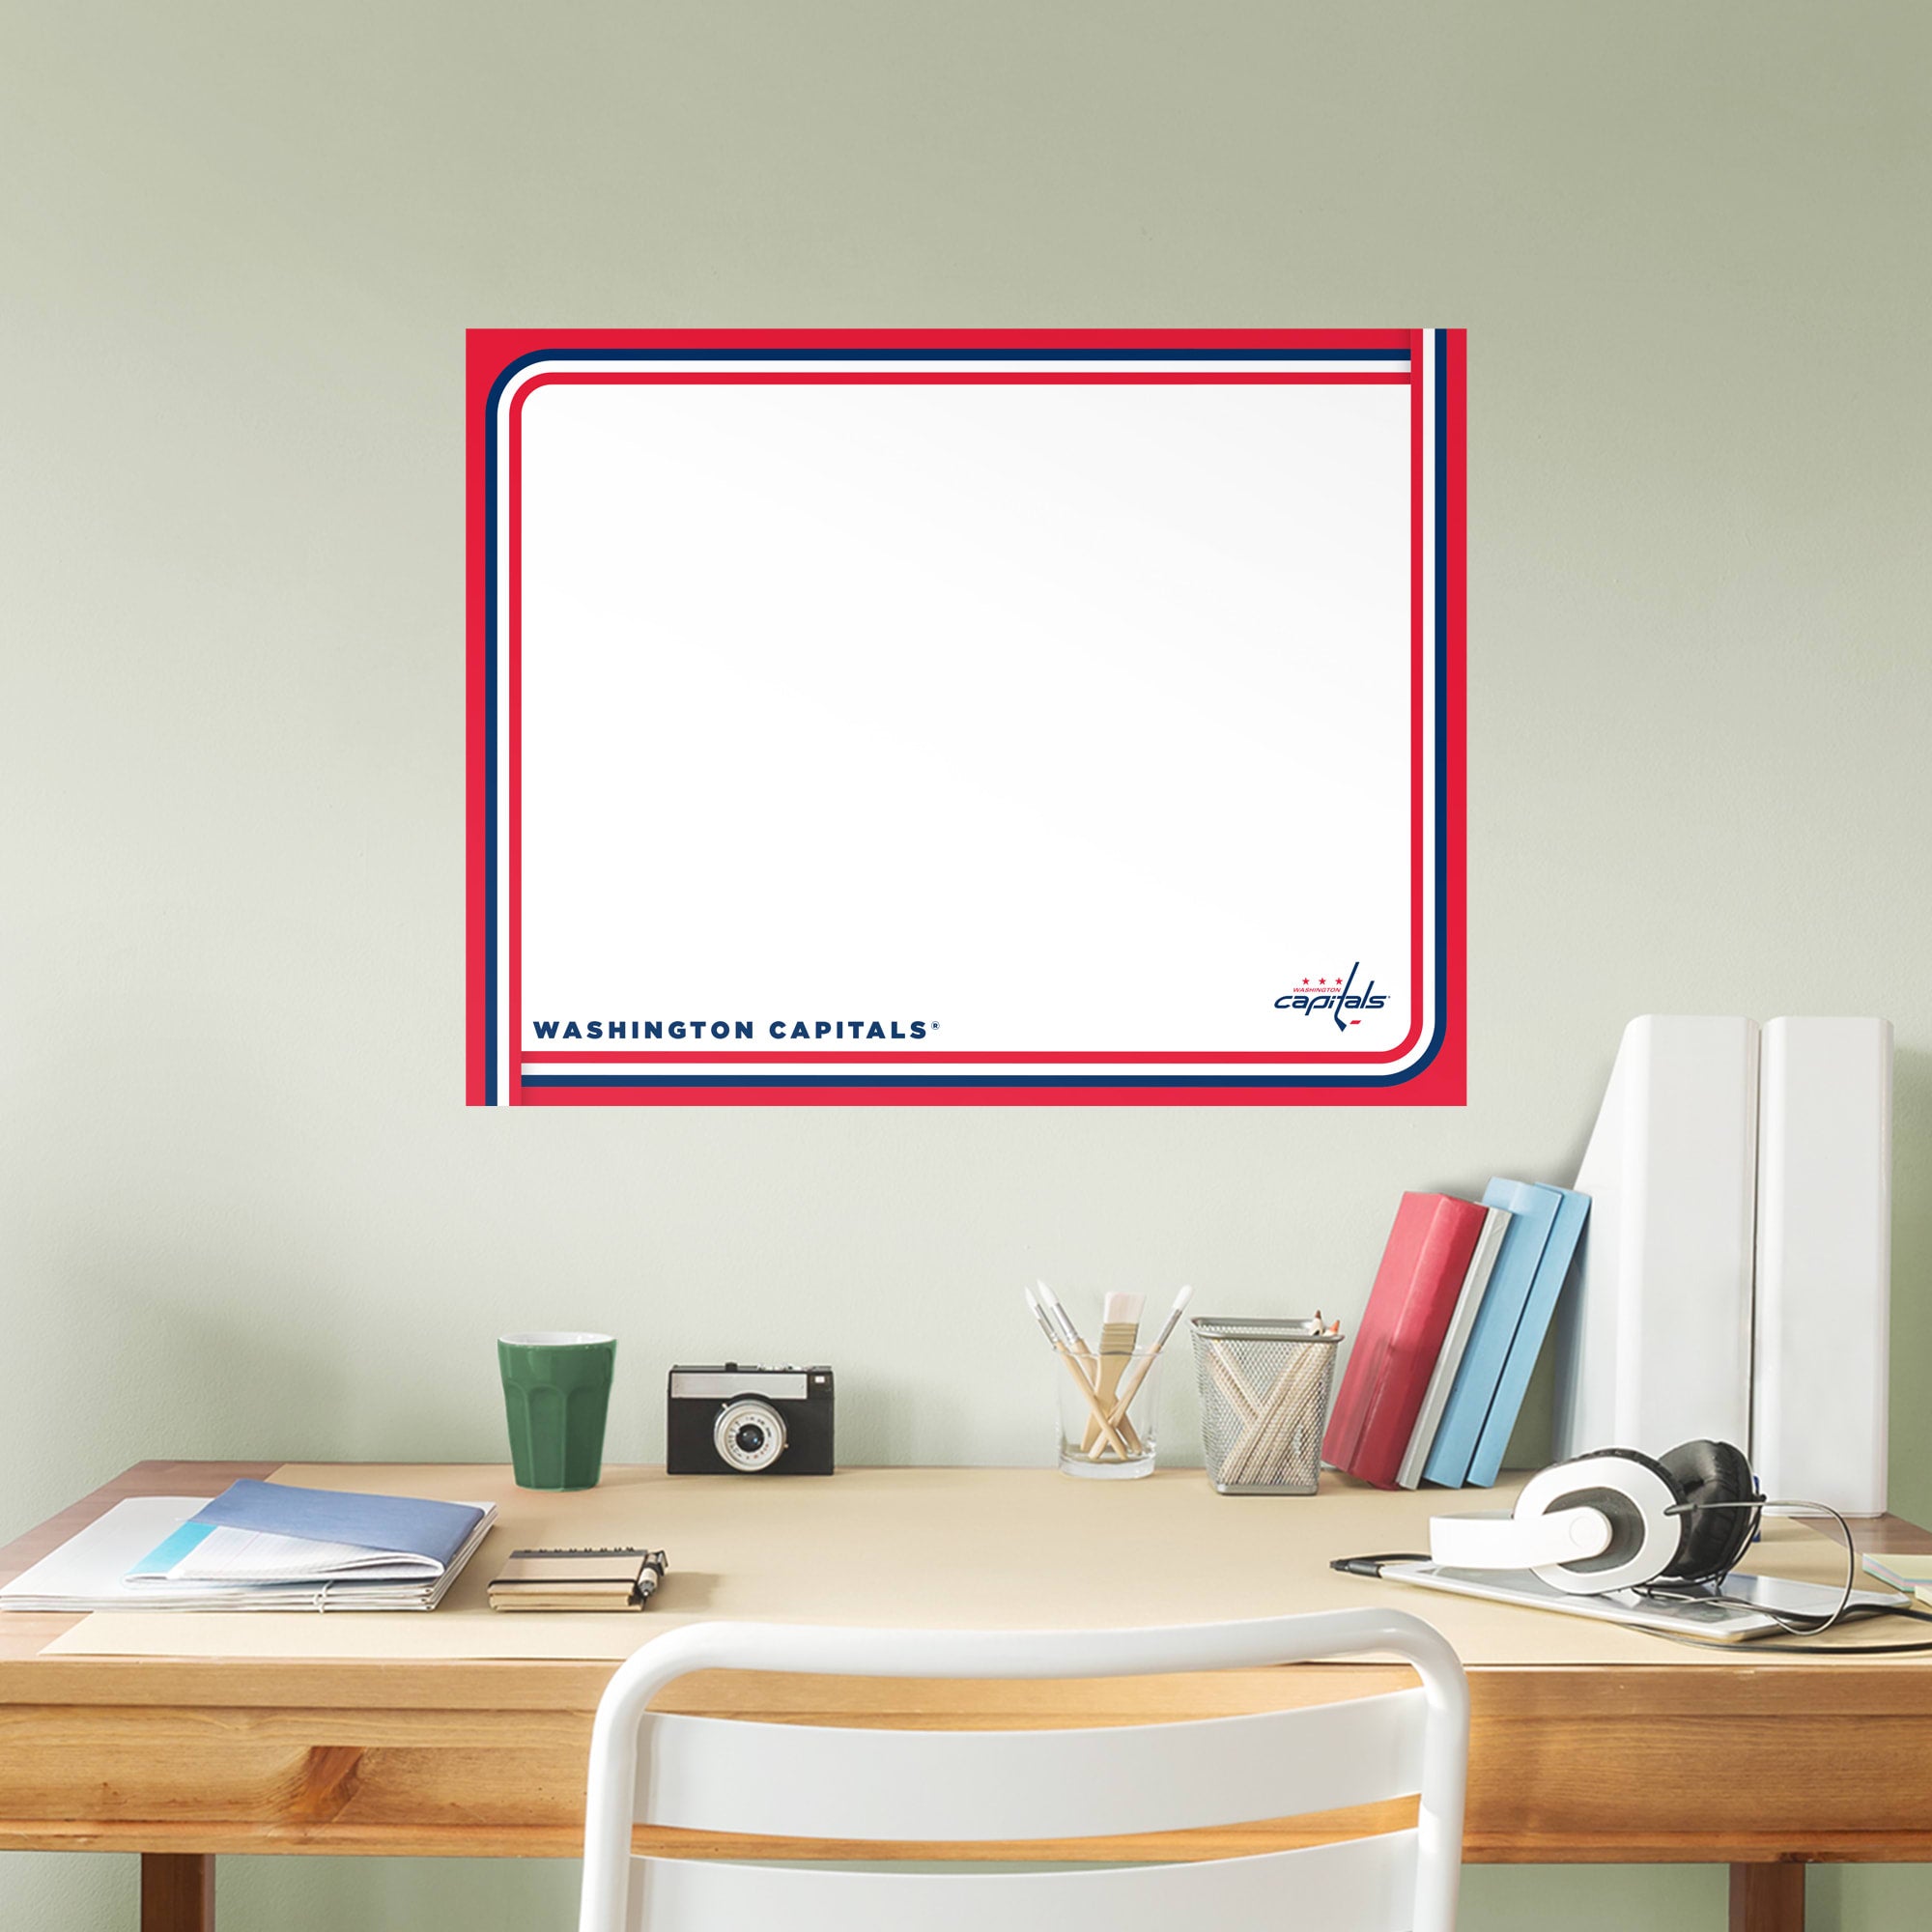 Washington Capitals: Dry Erase Whiteboard - X-Large Officially Licensed NHL Removable Wall Decal XL by Fathead | Vinyl